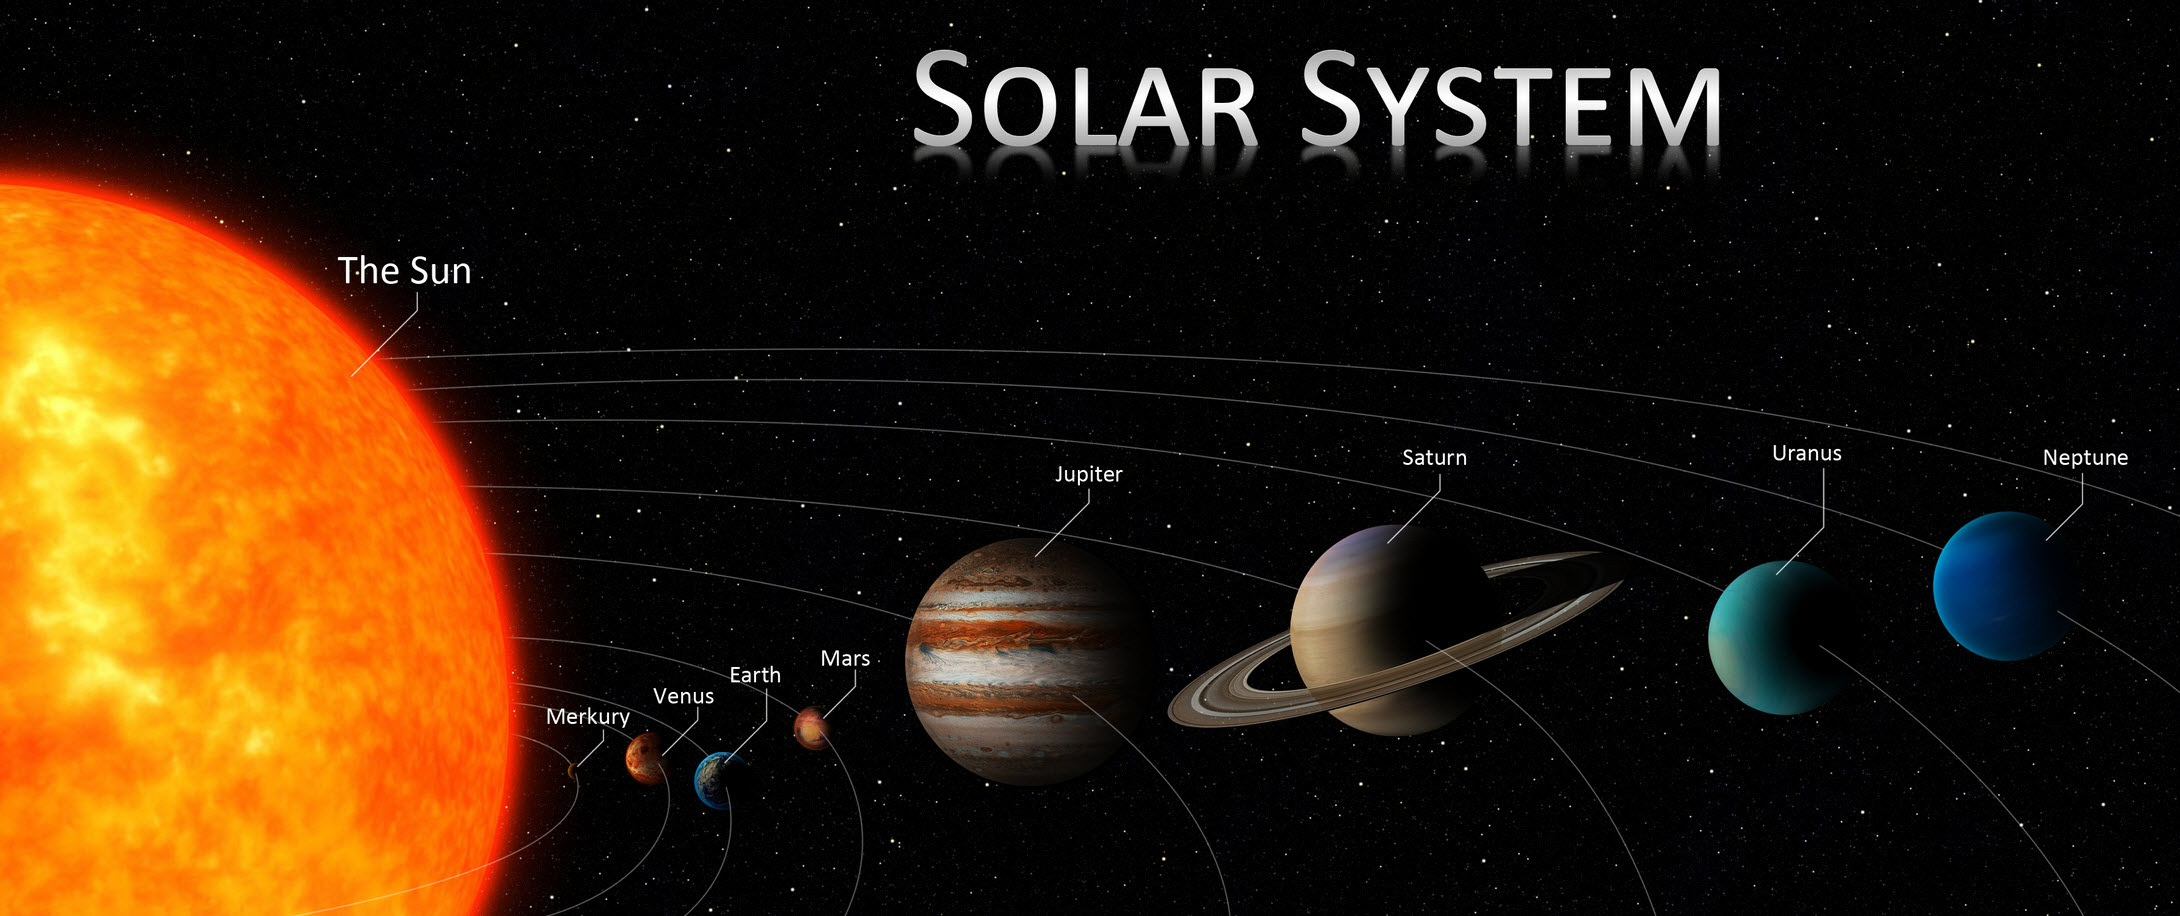 The Solar System consists of the Sun and the objects that orbit it, whether they orbit it directly or by orbiting other objects that orbit it directly